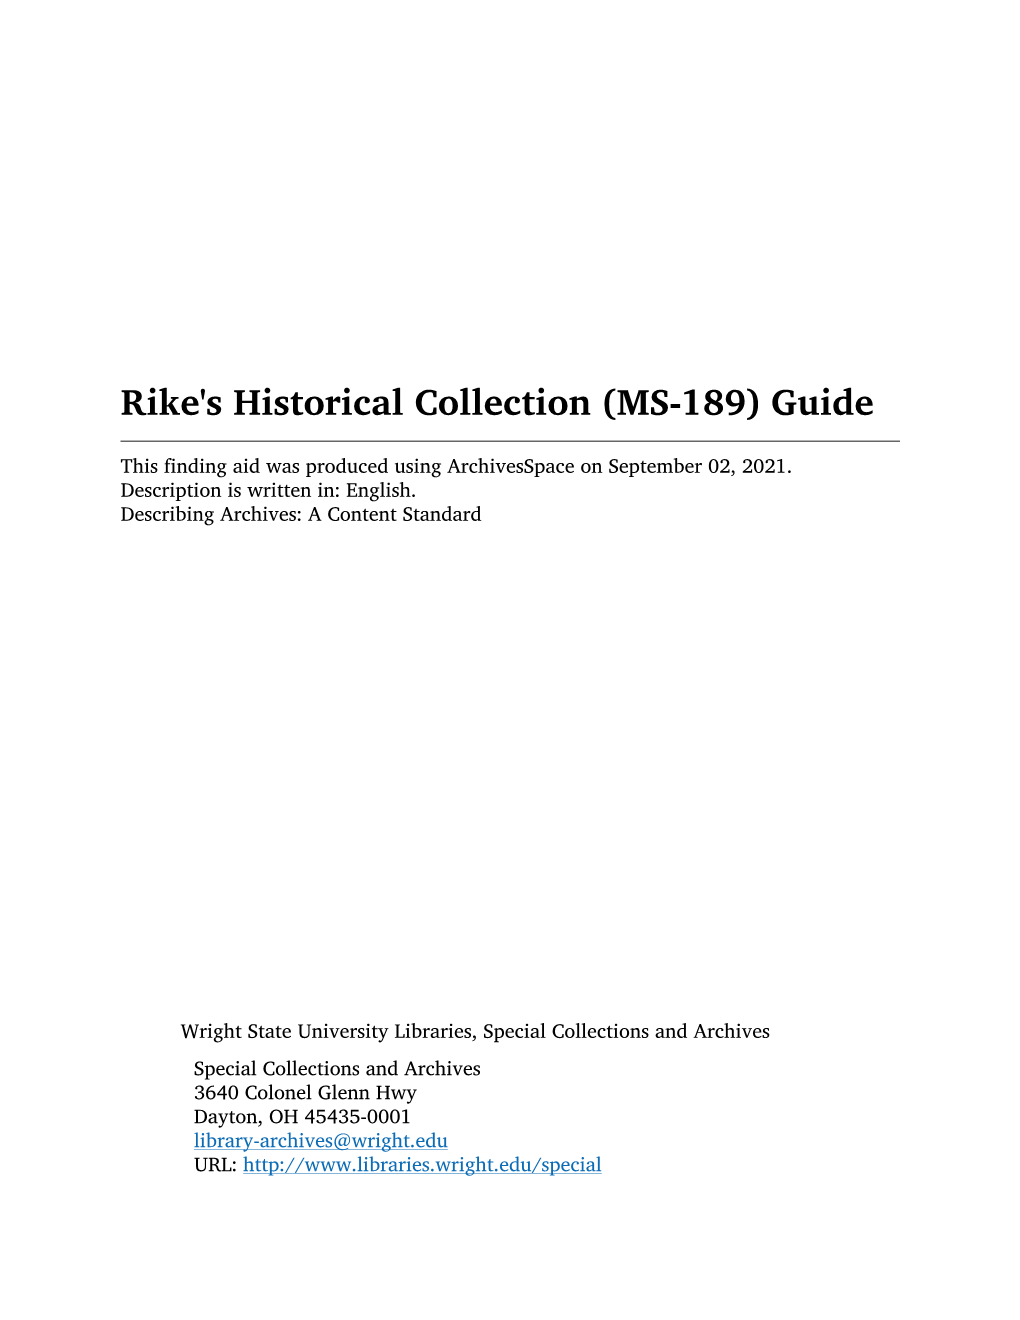 Rikes Historical Collection Contains Information About the Store's History, Promotion, Expansion, and Presidents